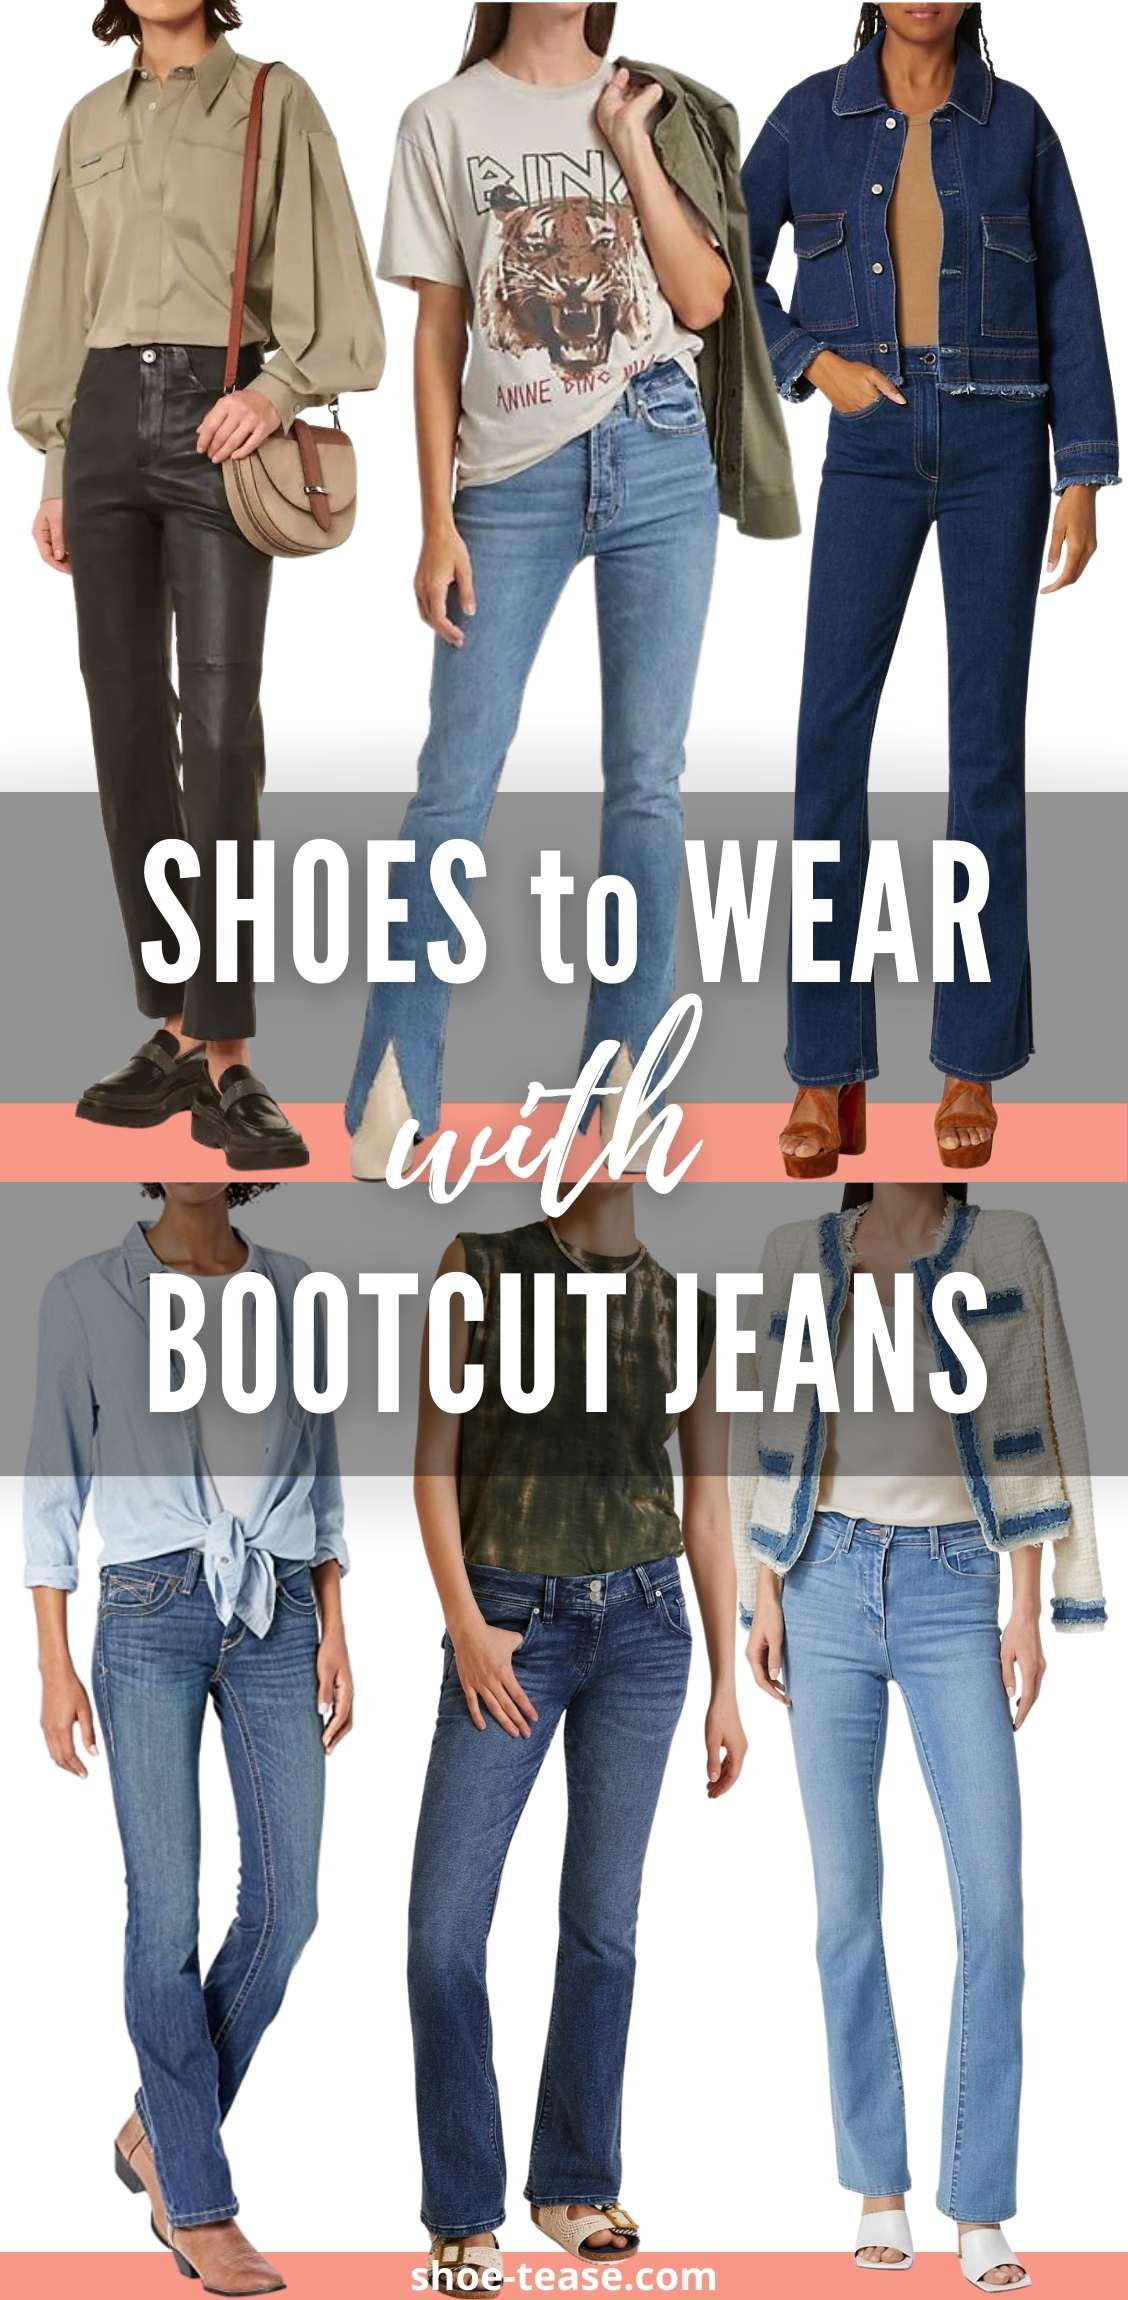 Collage with text reading shoes to wear with bootcut jeans over 6 women wearing different bootcut jeans outfit.